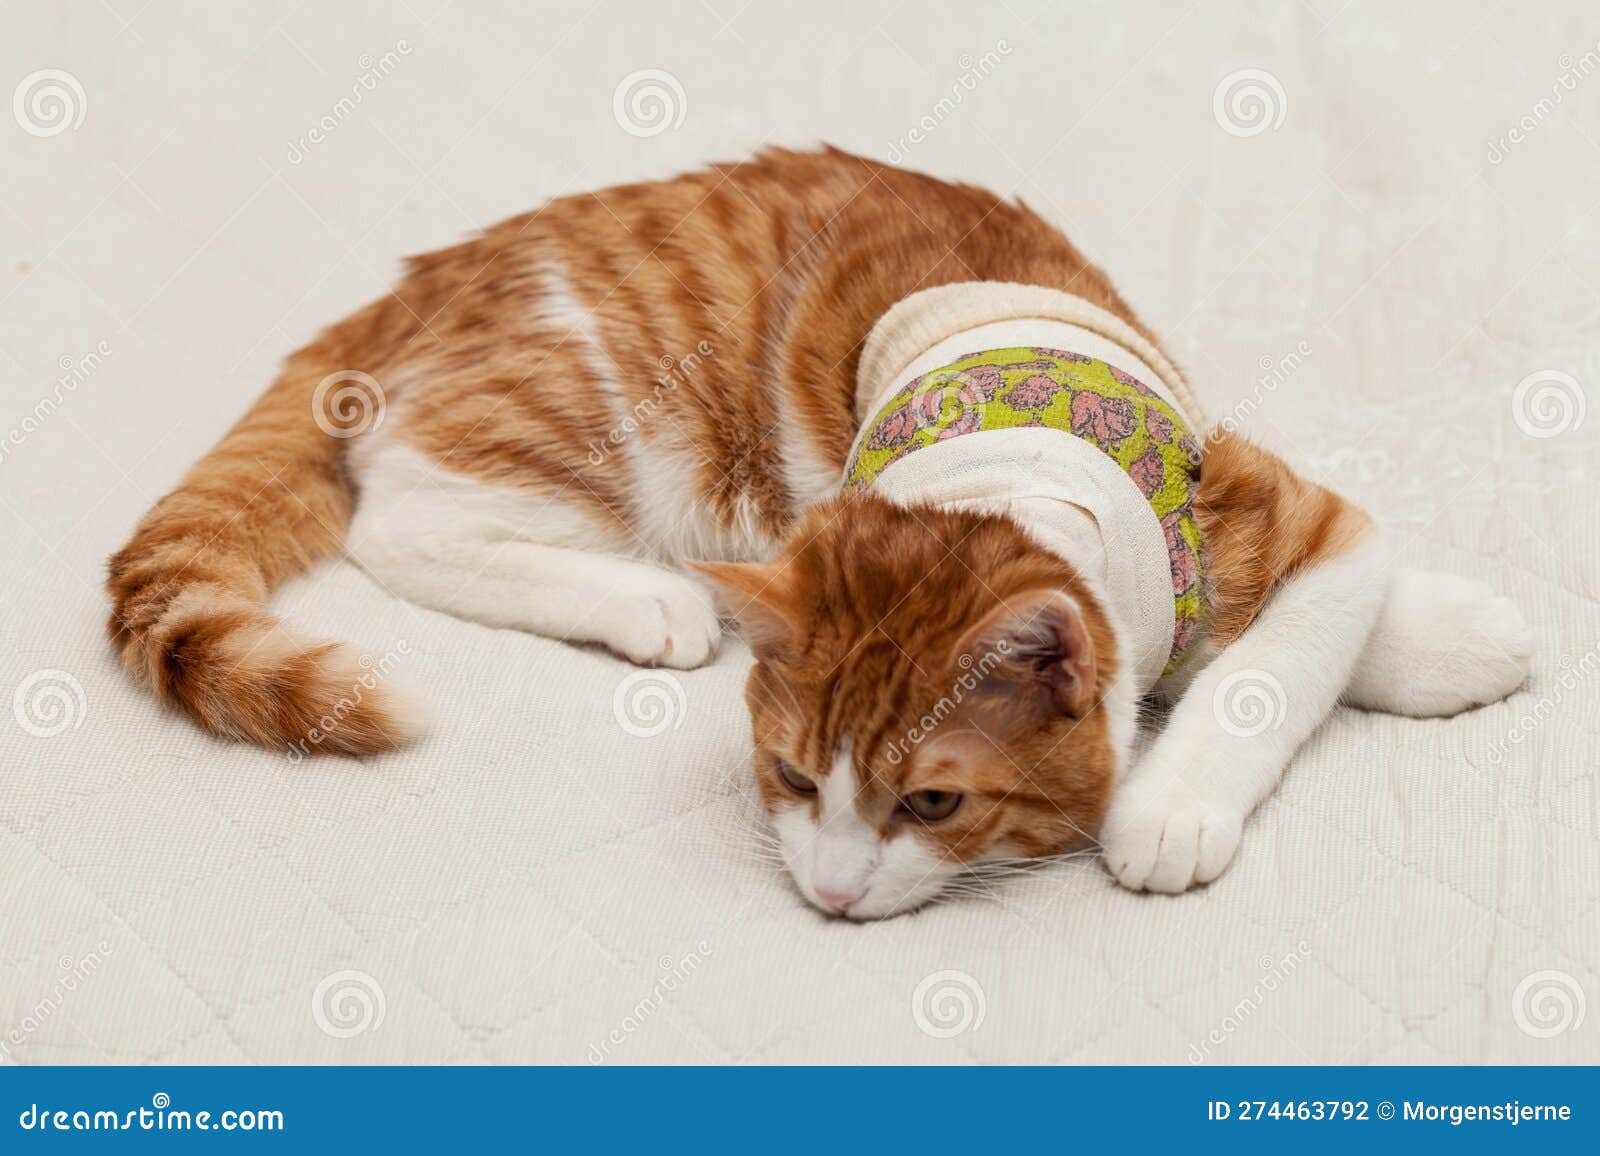 domestic yoing cat in bandage with broken paw